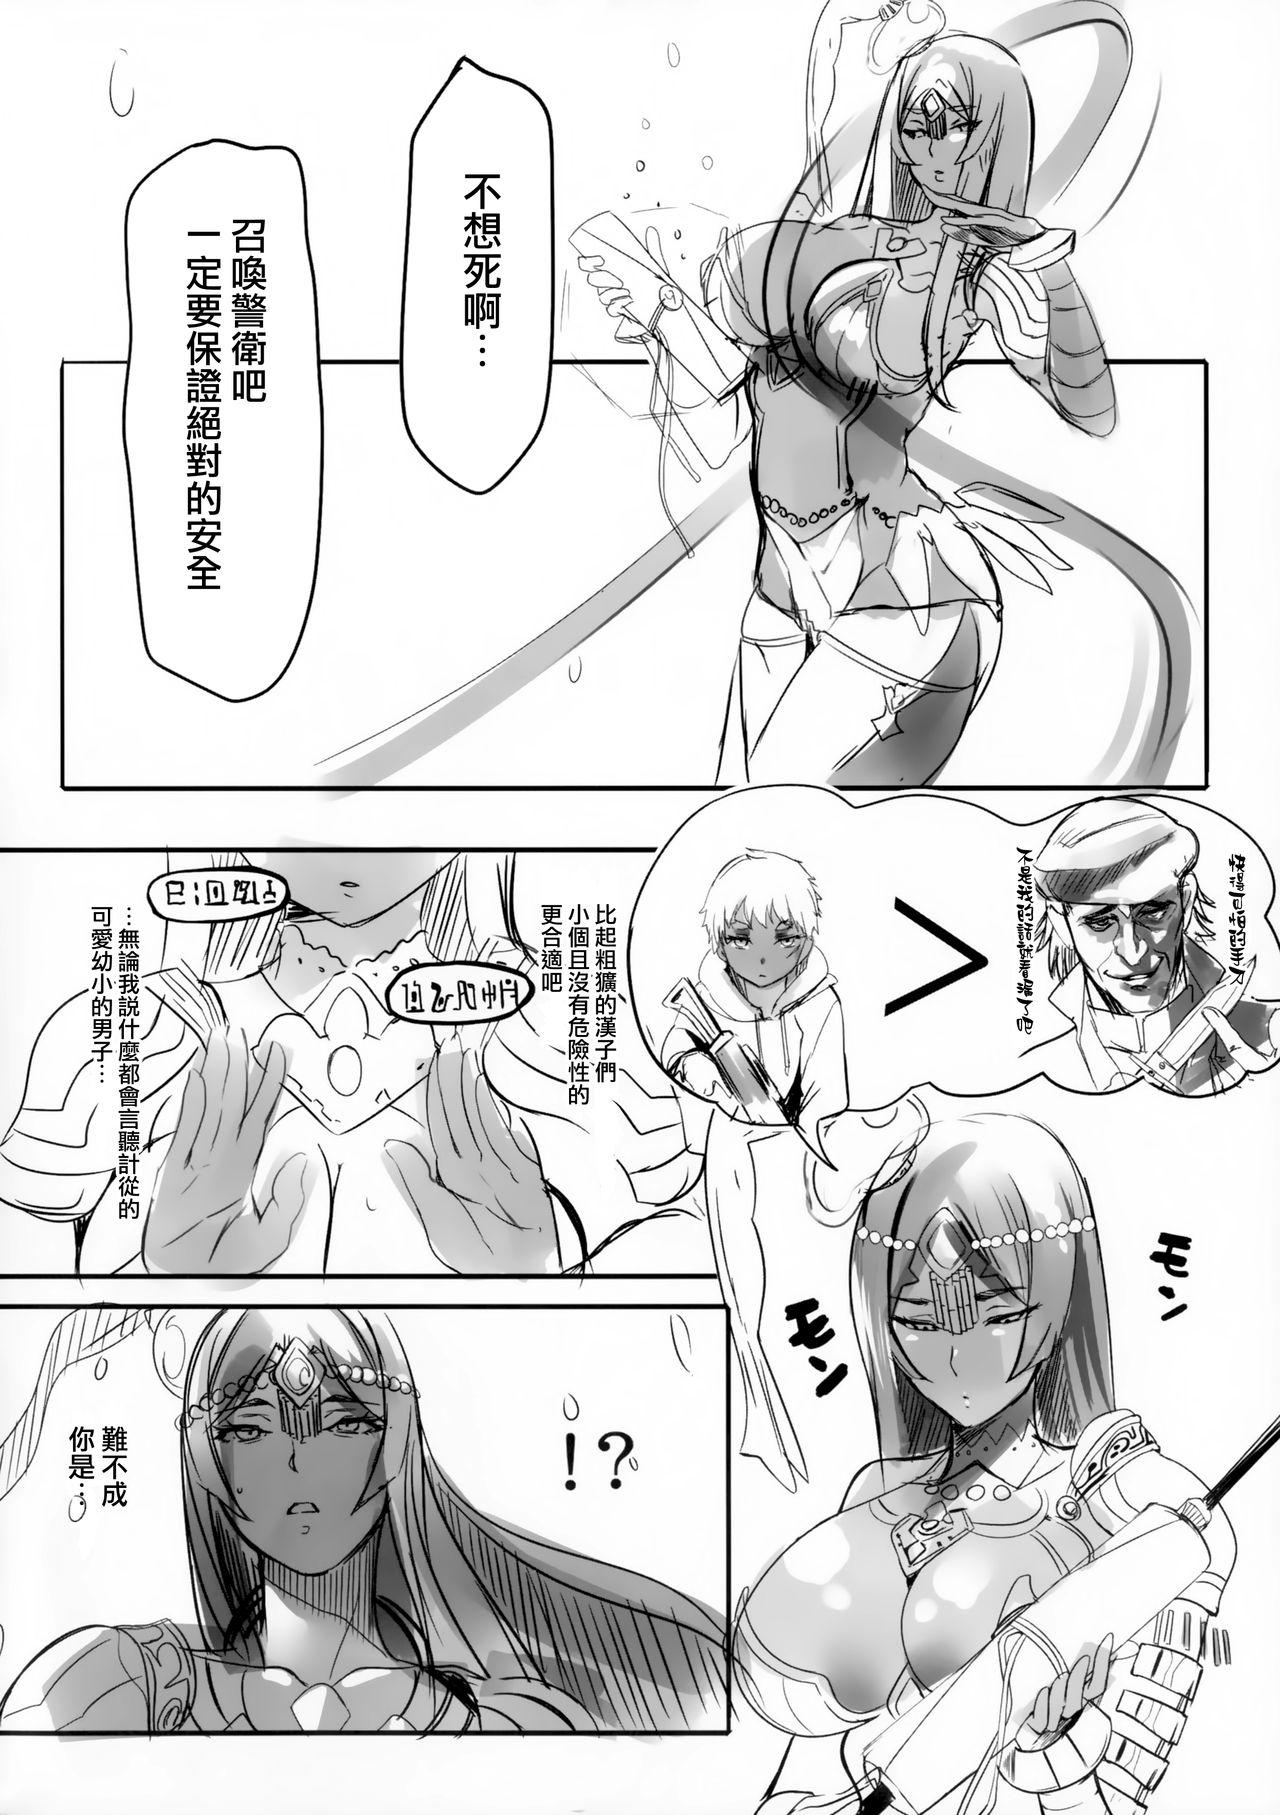 Boobies Fuyajou Caster wa Onegai Shitai! - I'd like to ask caster! - Fate grand order Brother - Page 2